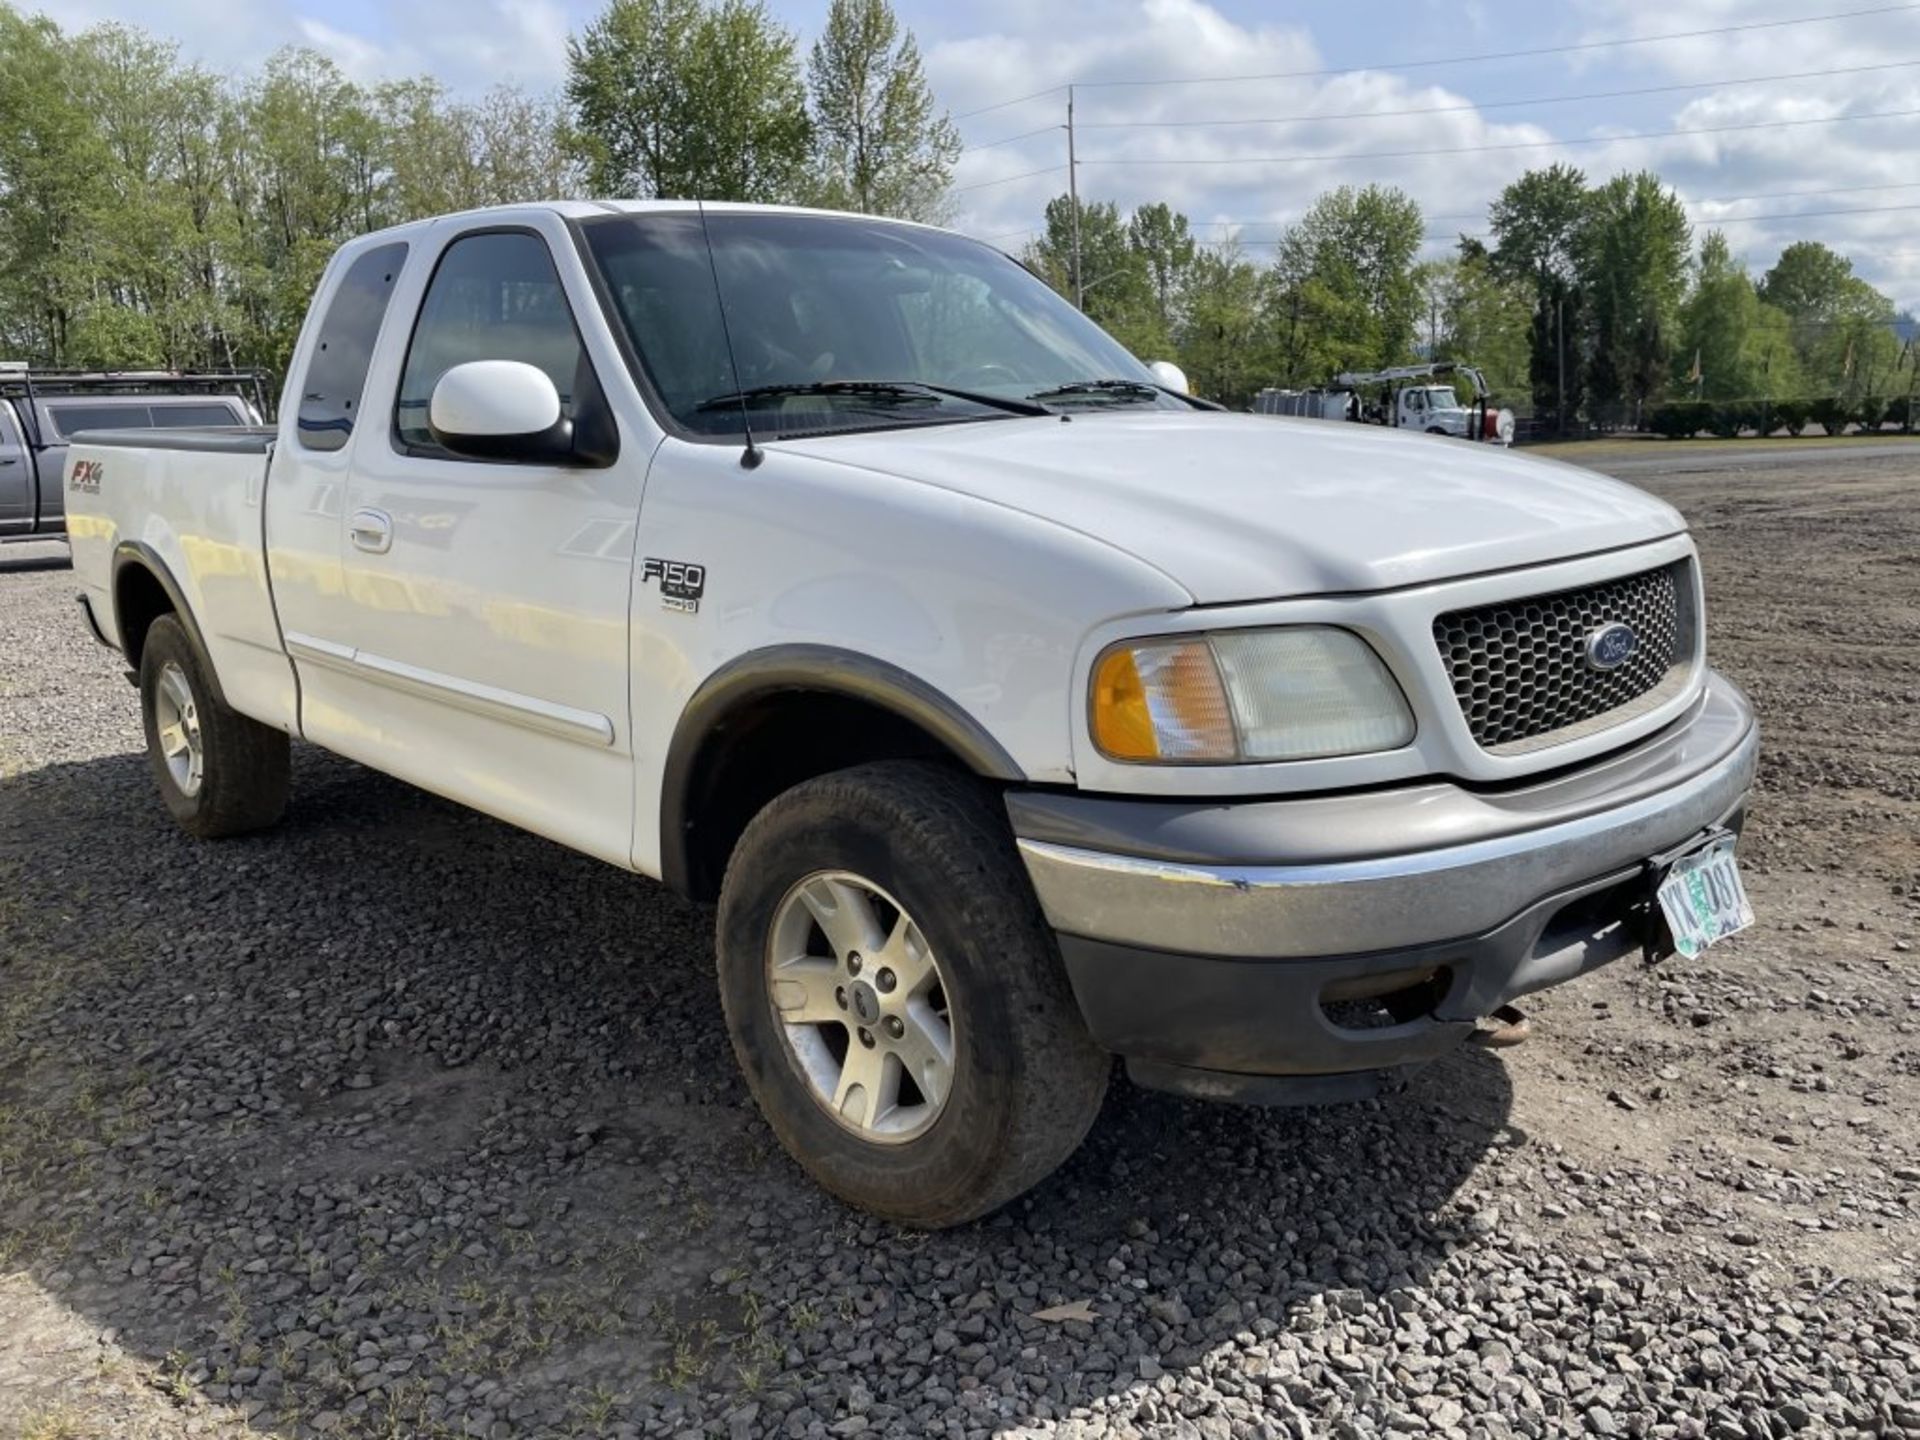 2002 Ford F150 XLT 4x4 Extra Cab Pickup - Image 2 of 20